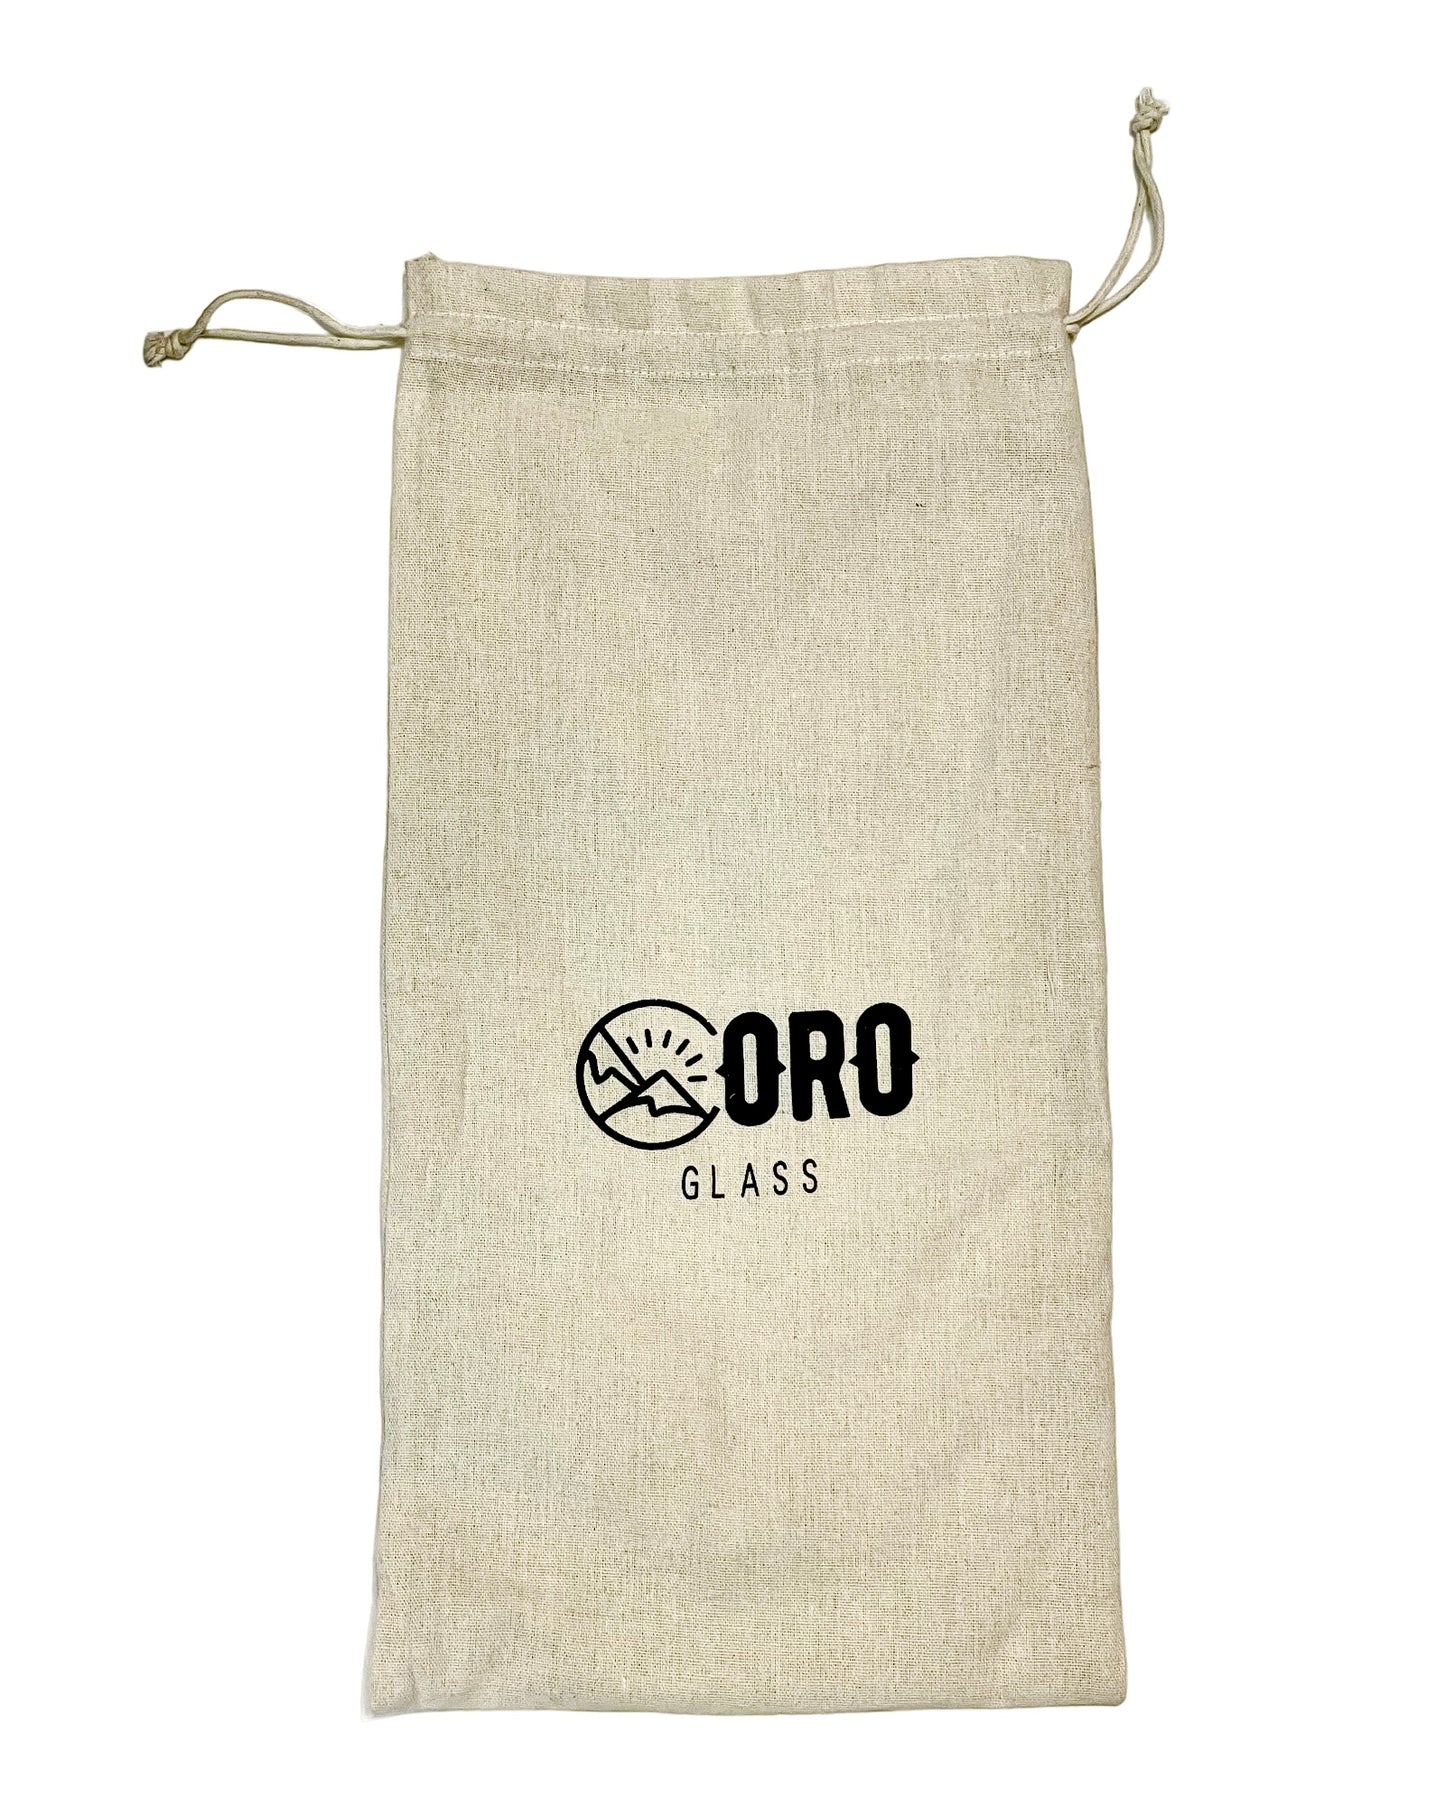 A large Oro Canvas Bag.